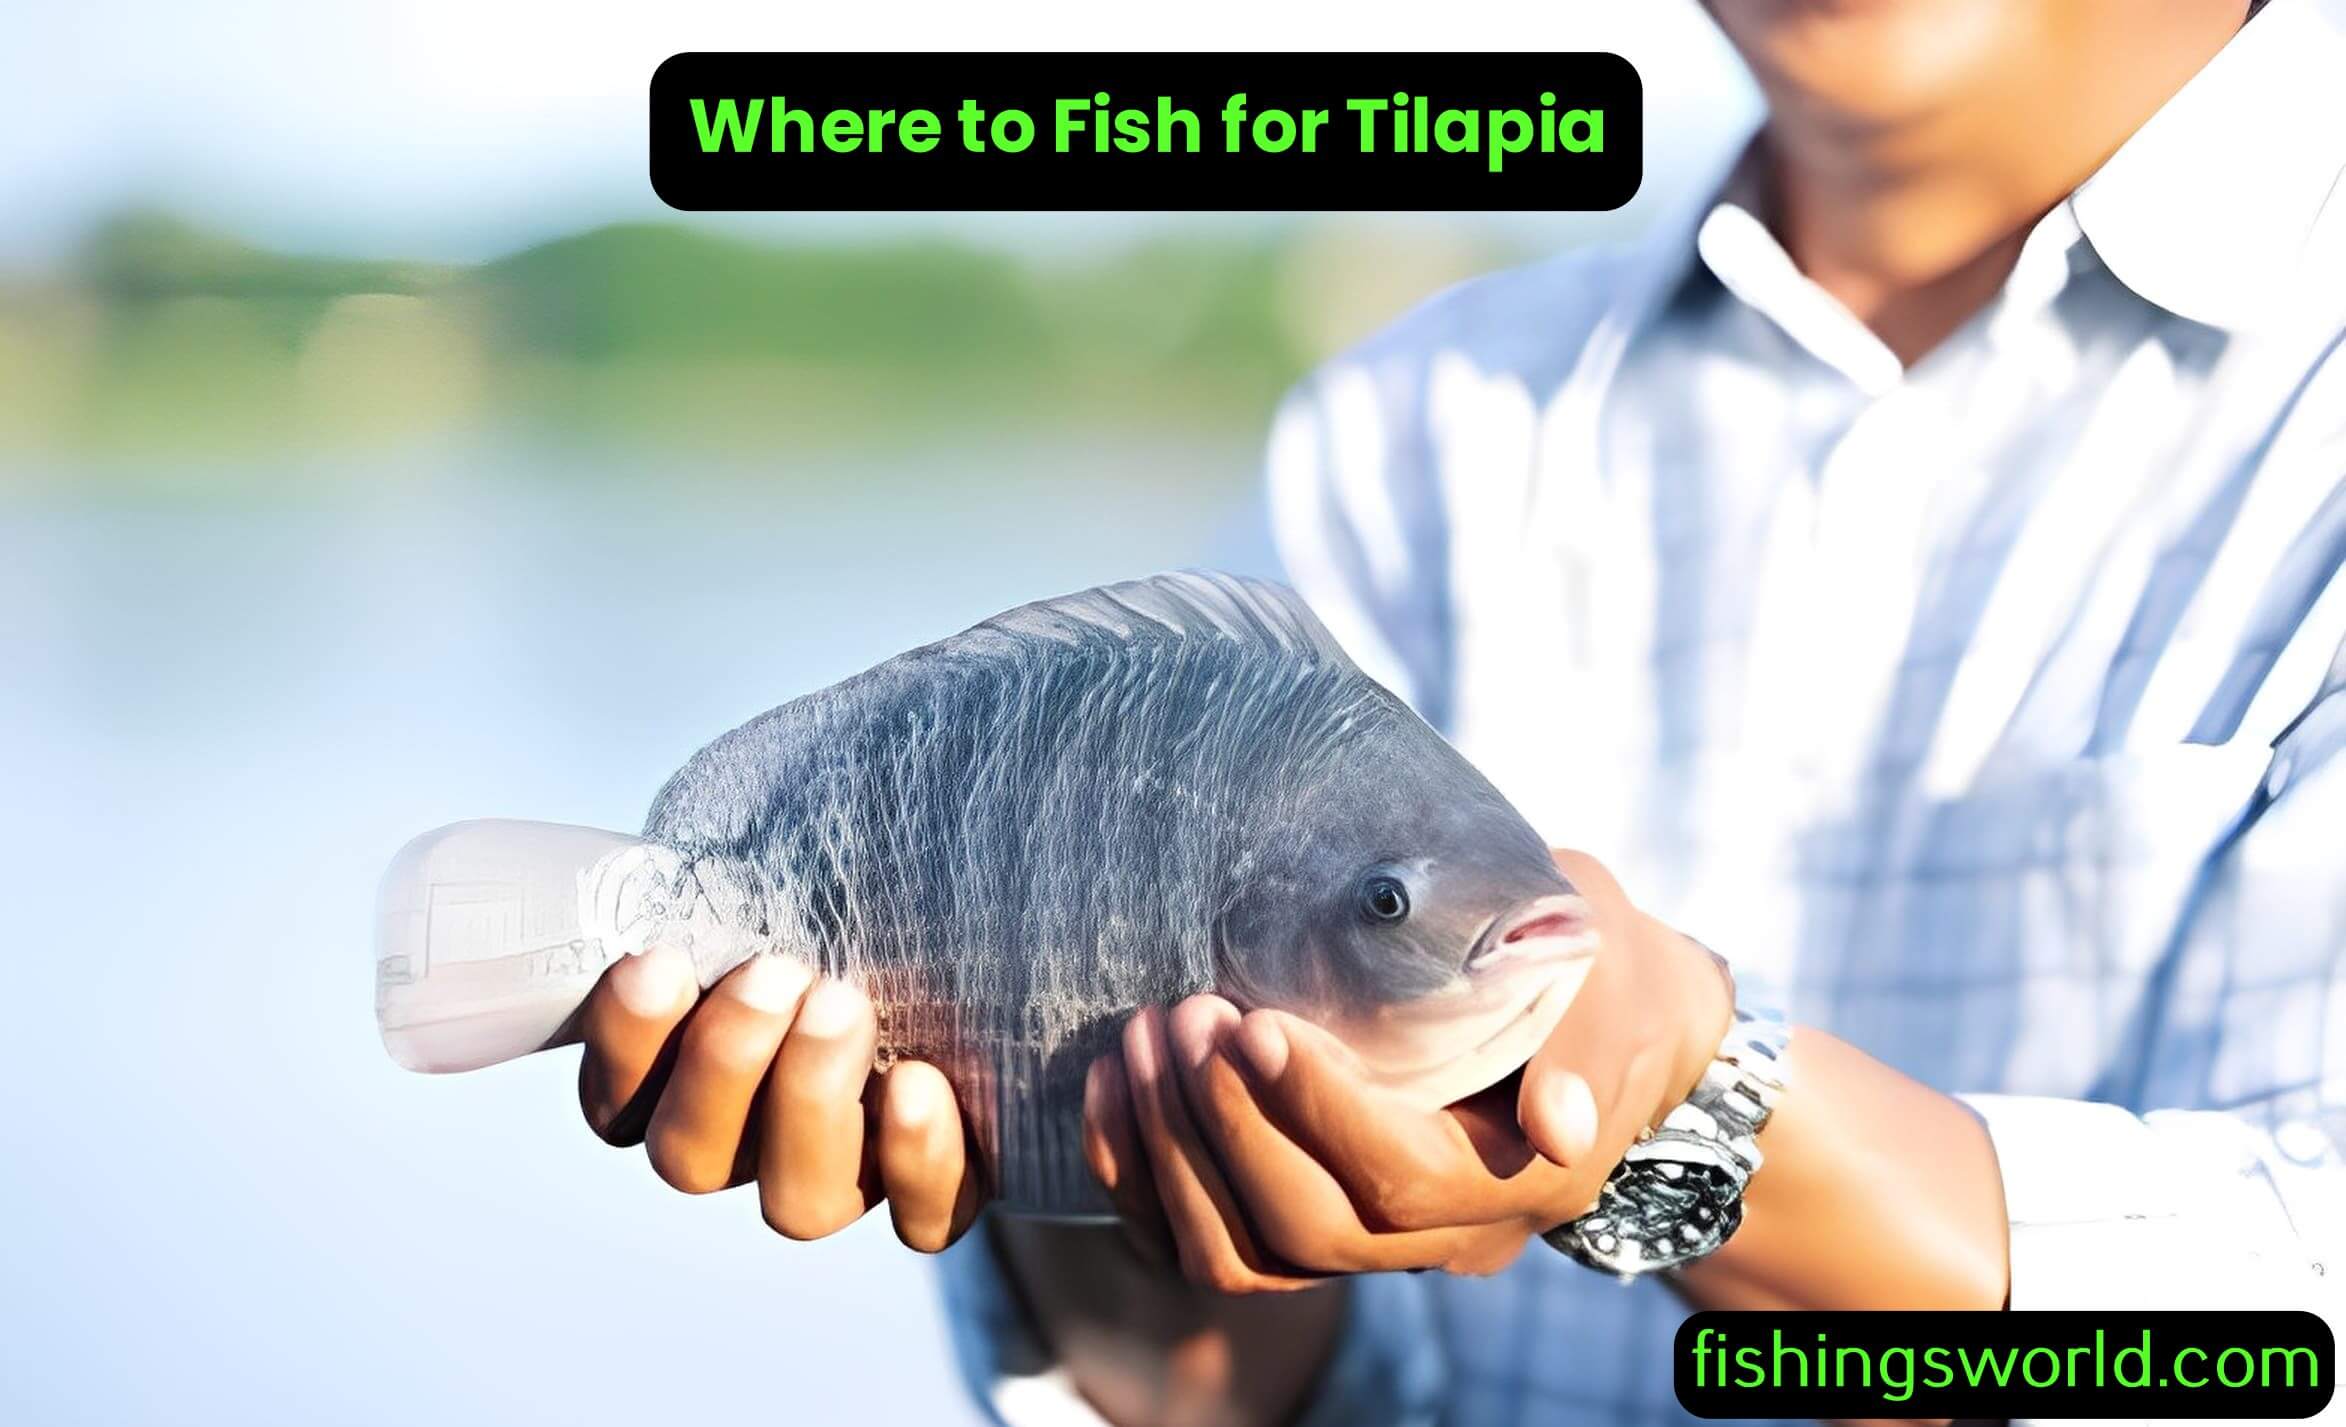 Where to Fish for Tilapia